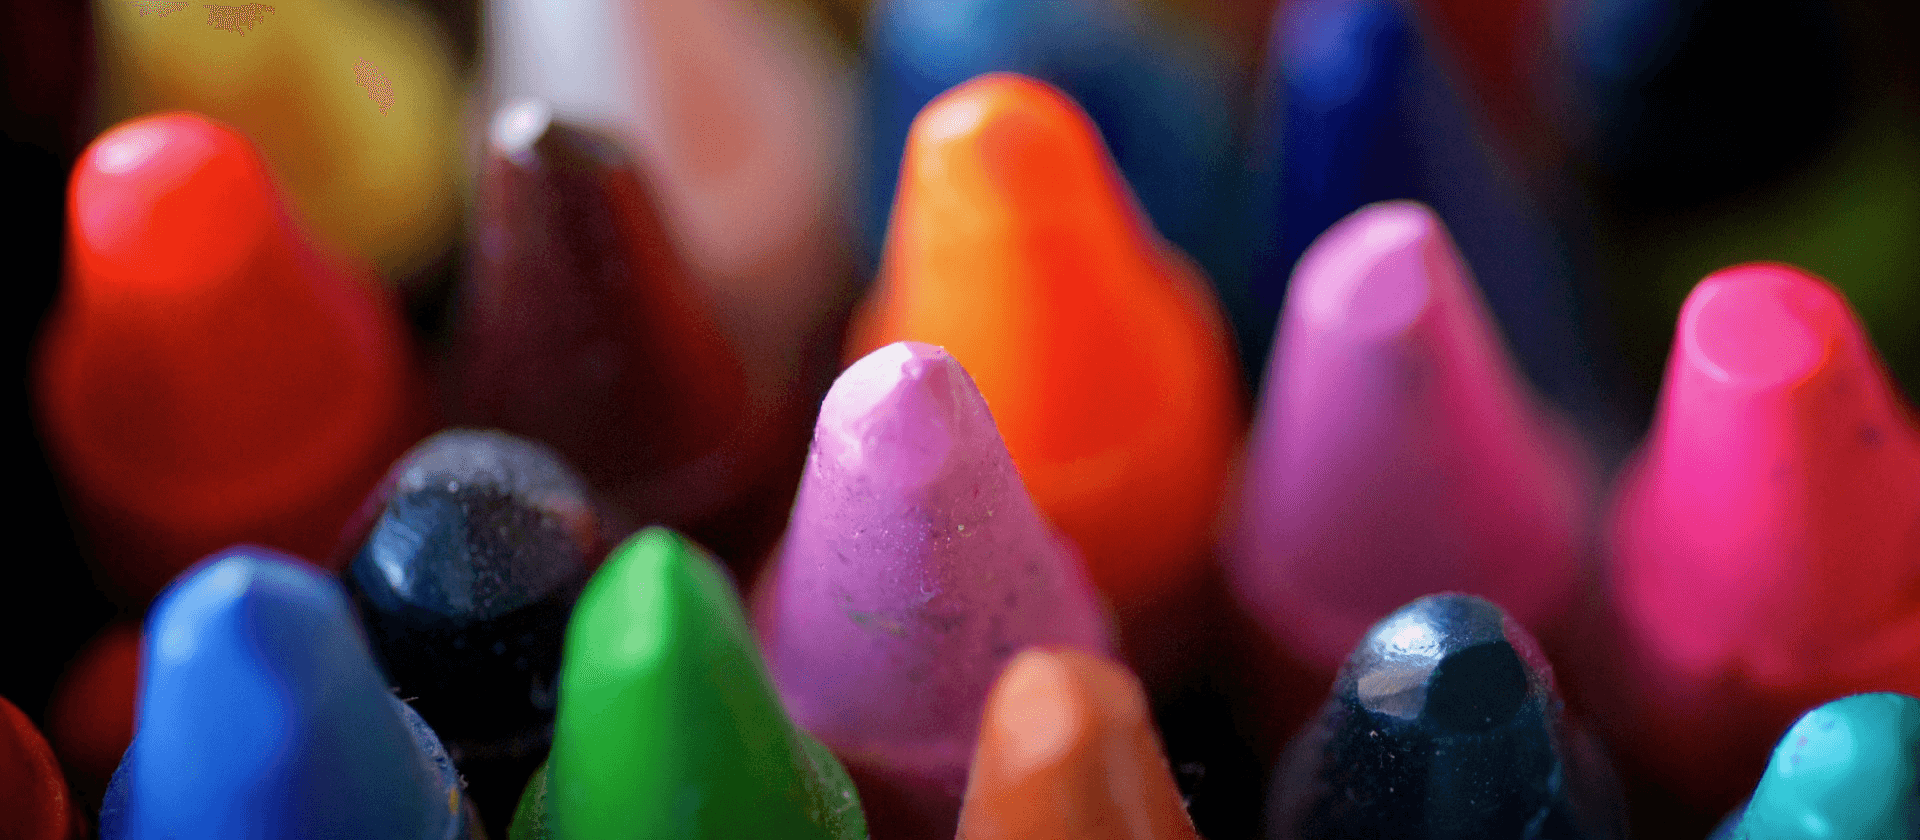 Crayons of different colors, photo.